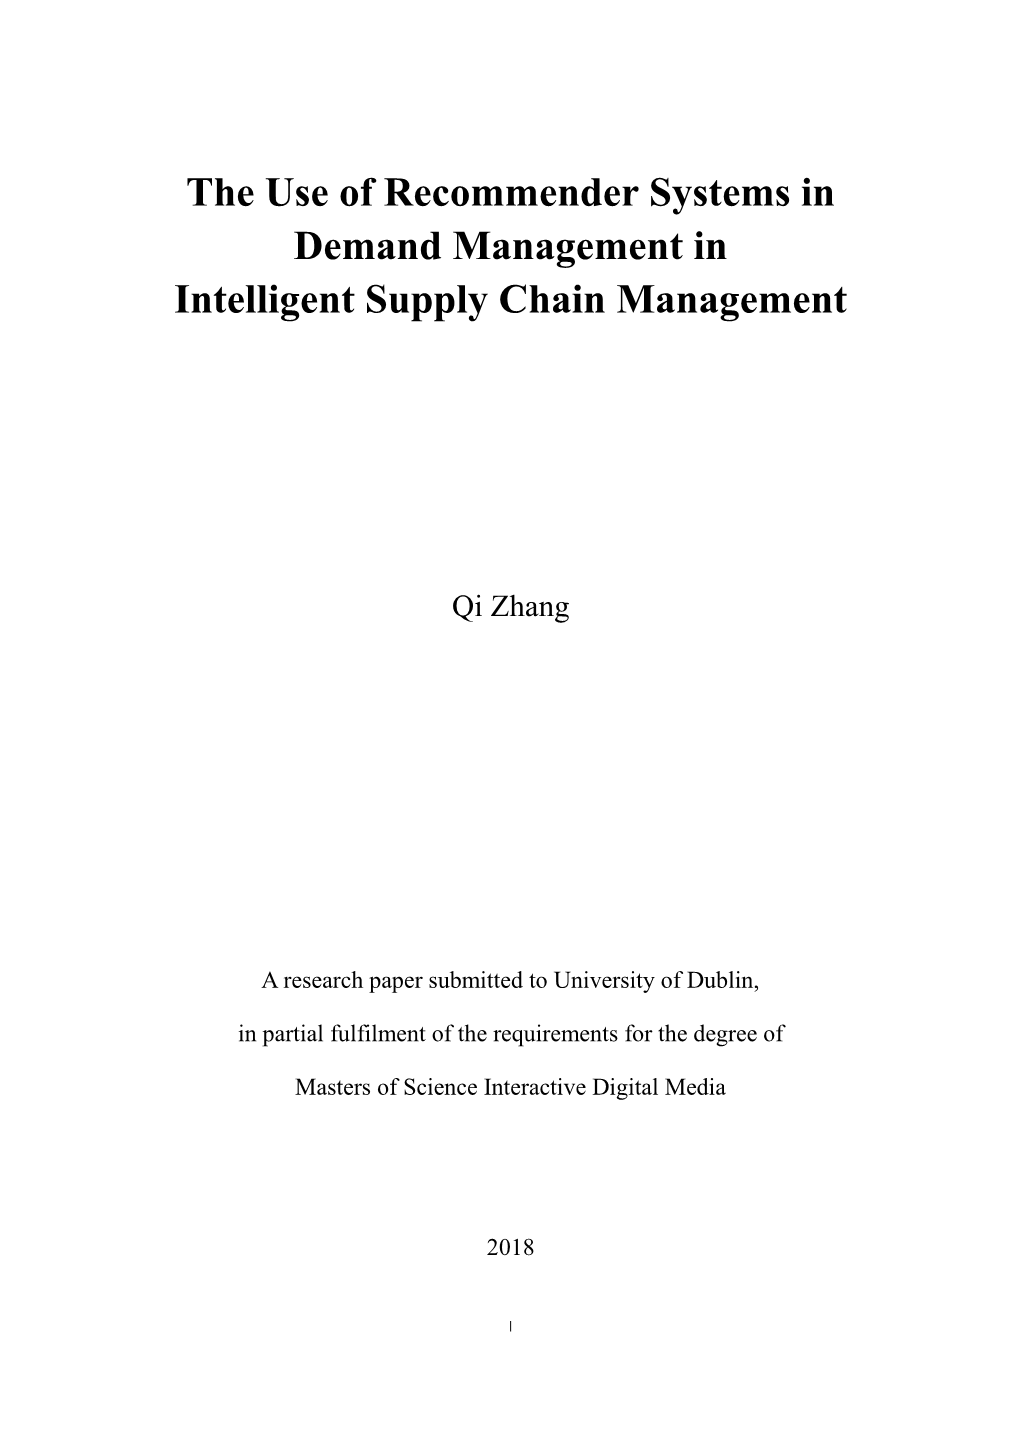 The Use of Recommender Systems in Demand Management in Intelligent Supply Chain Management